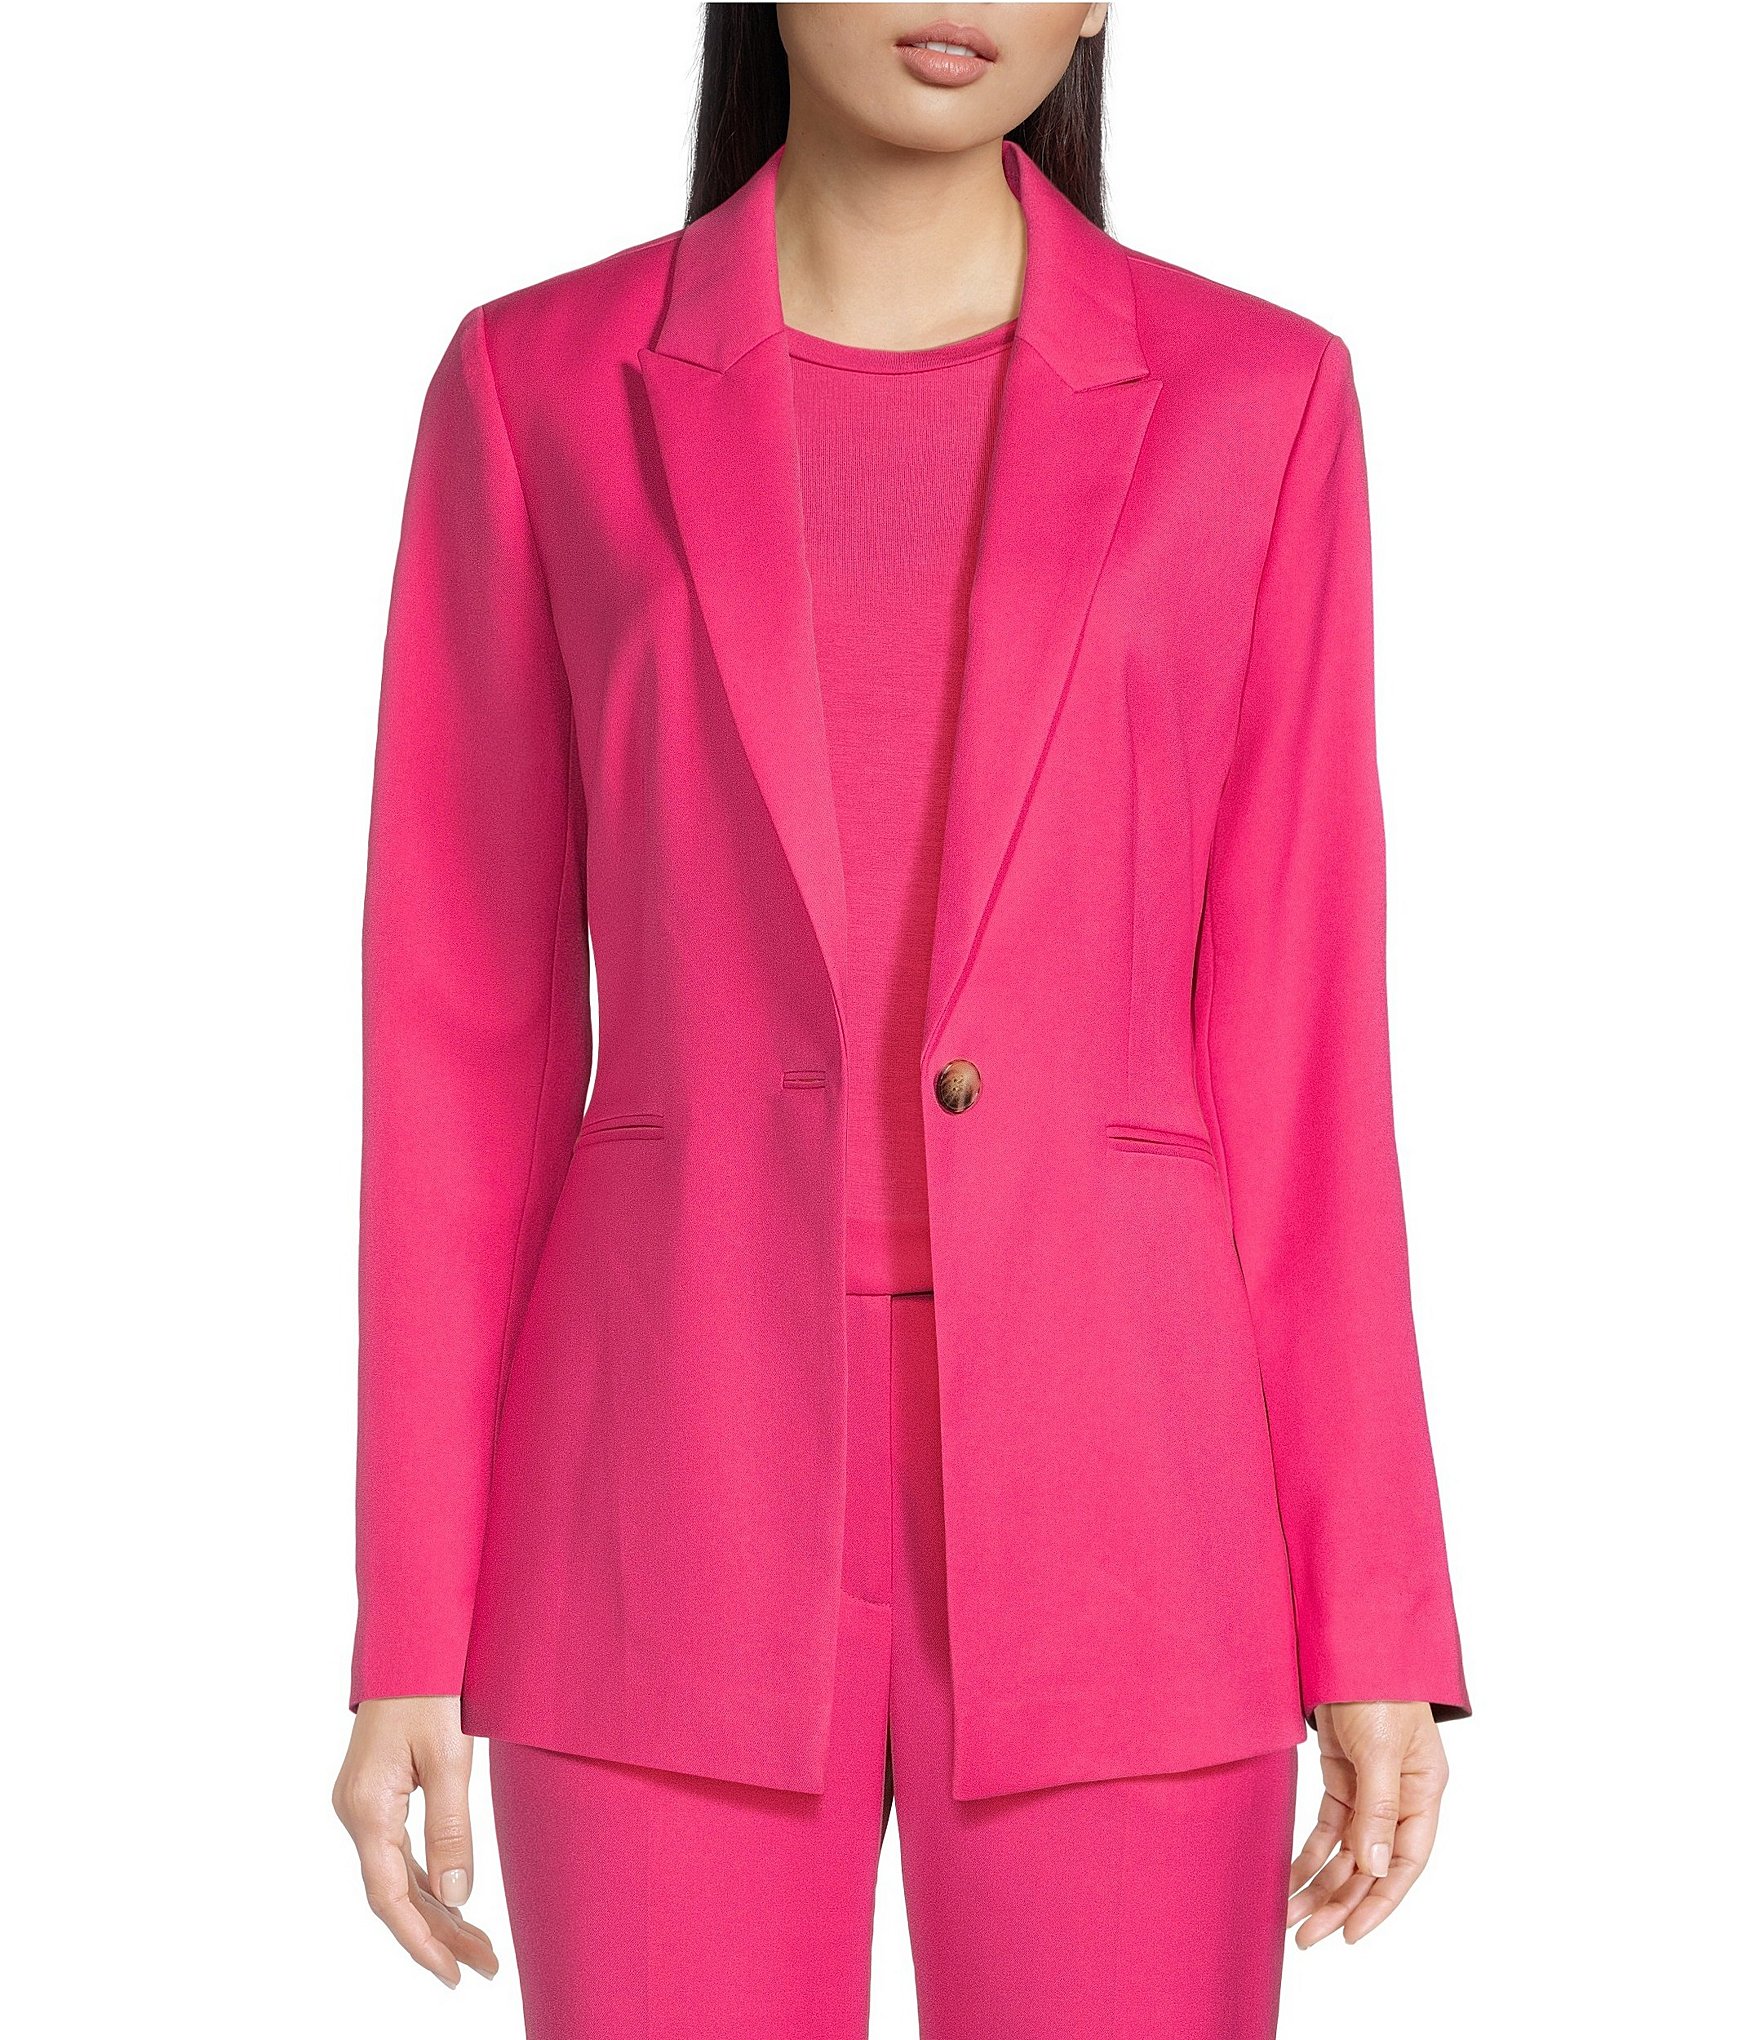 pink suit: Women's Clothing